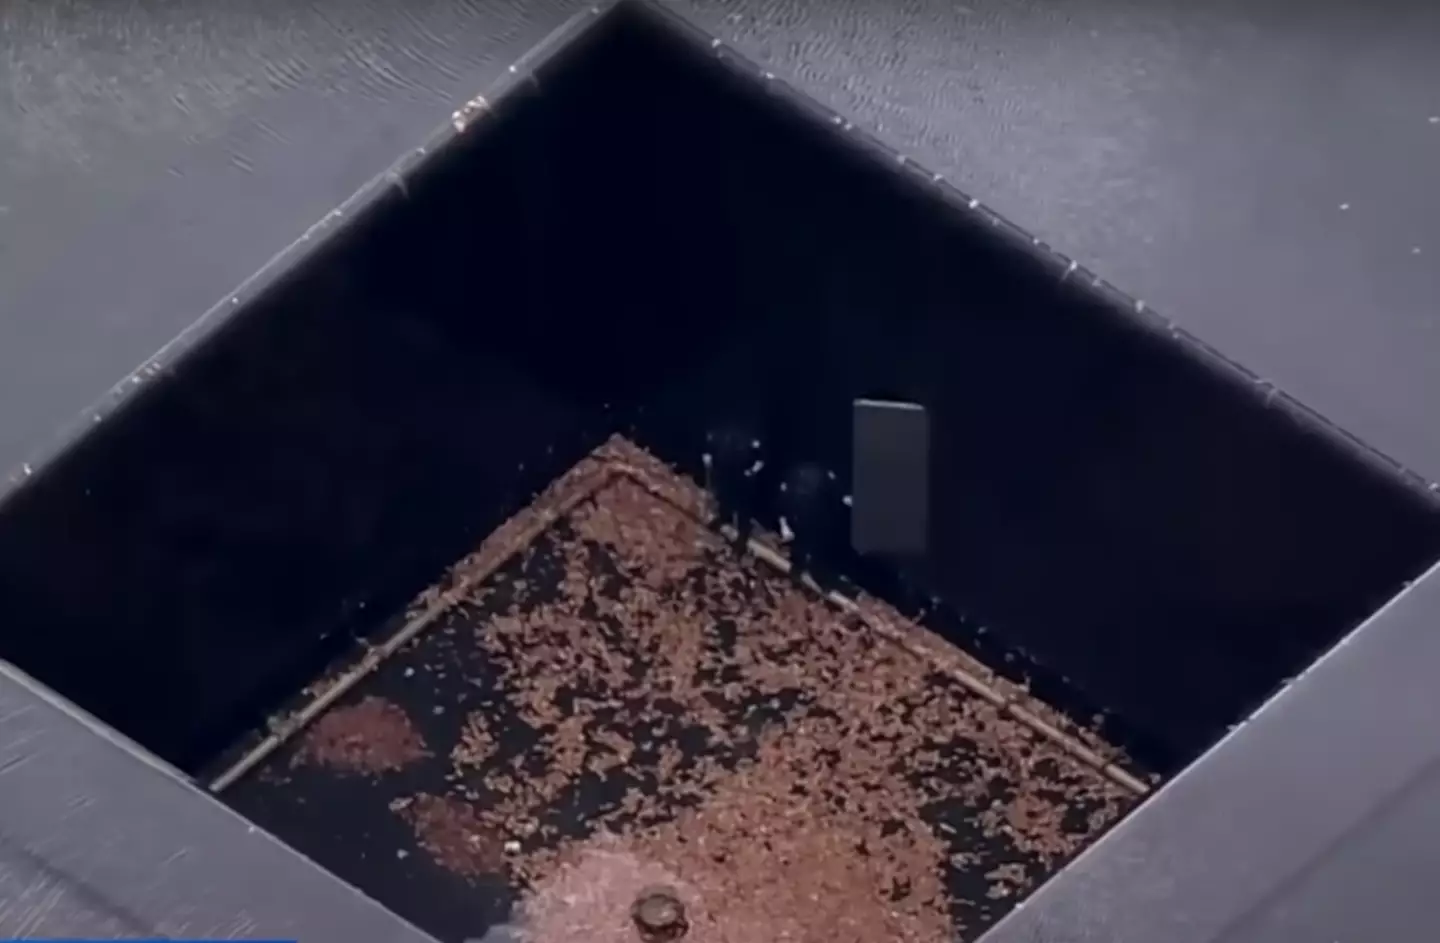 The man continued to inch himself deeper before completely falling down the 20 foot drop.